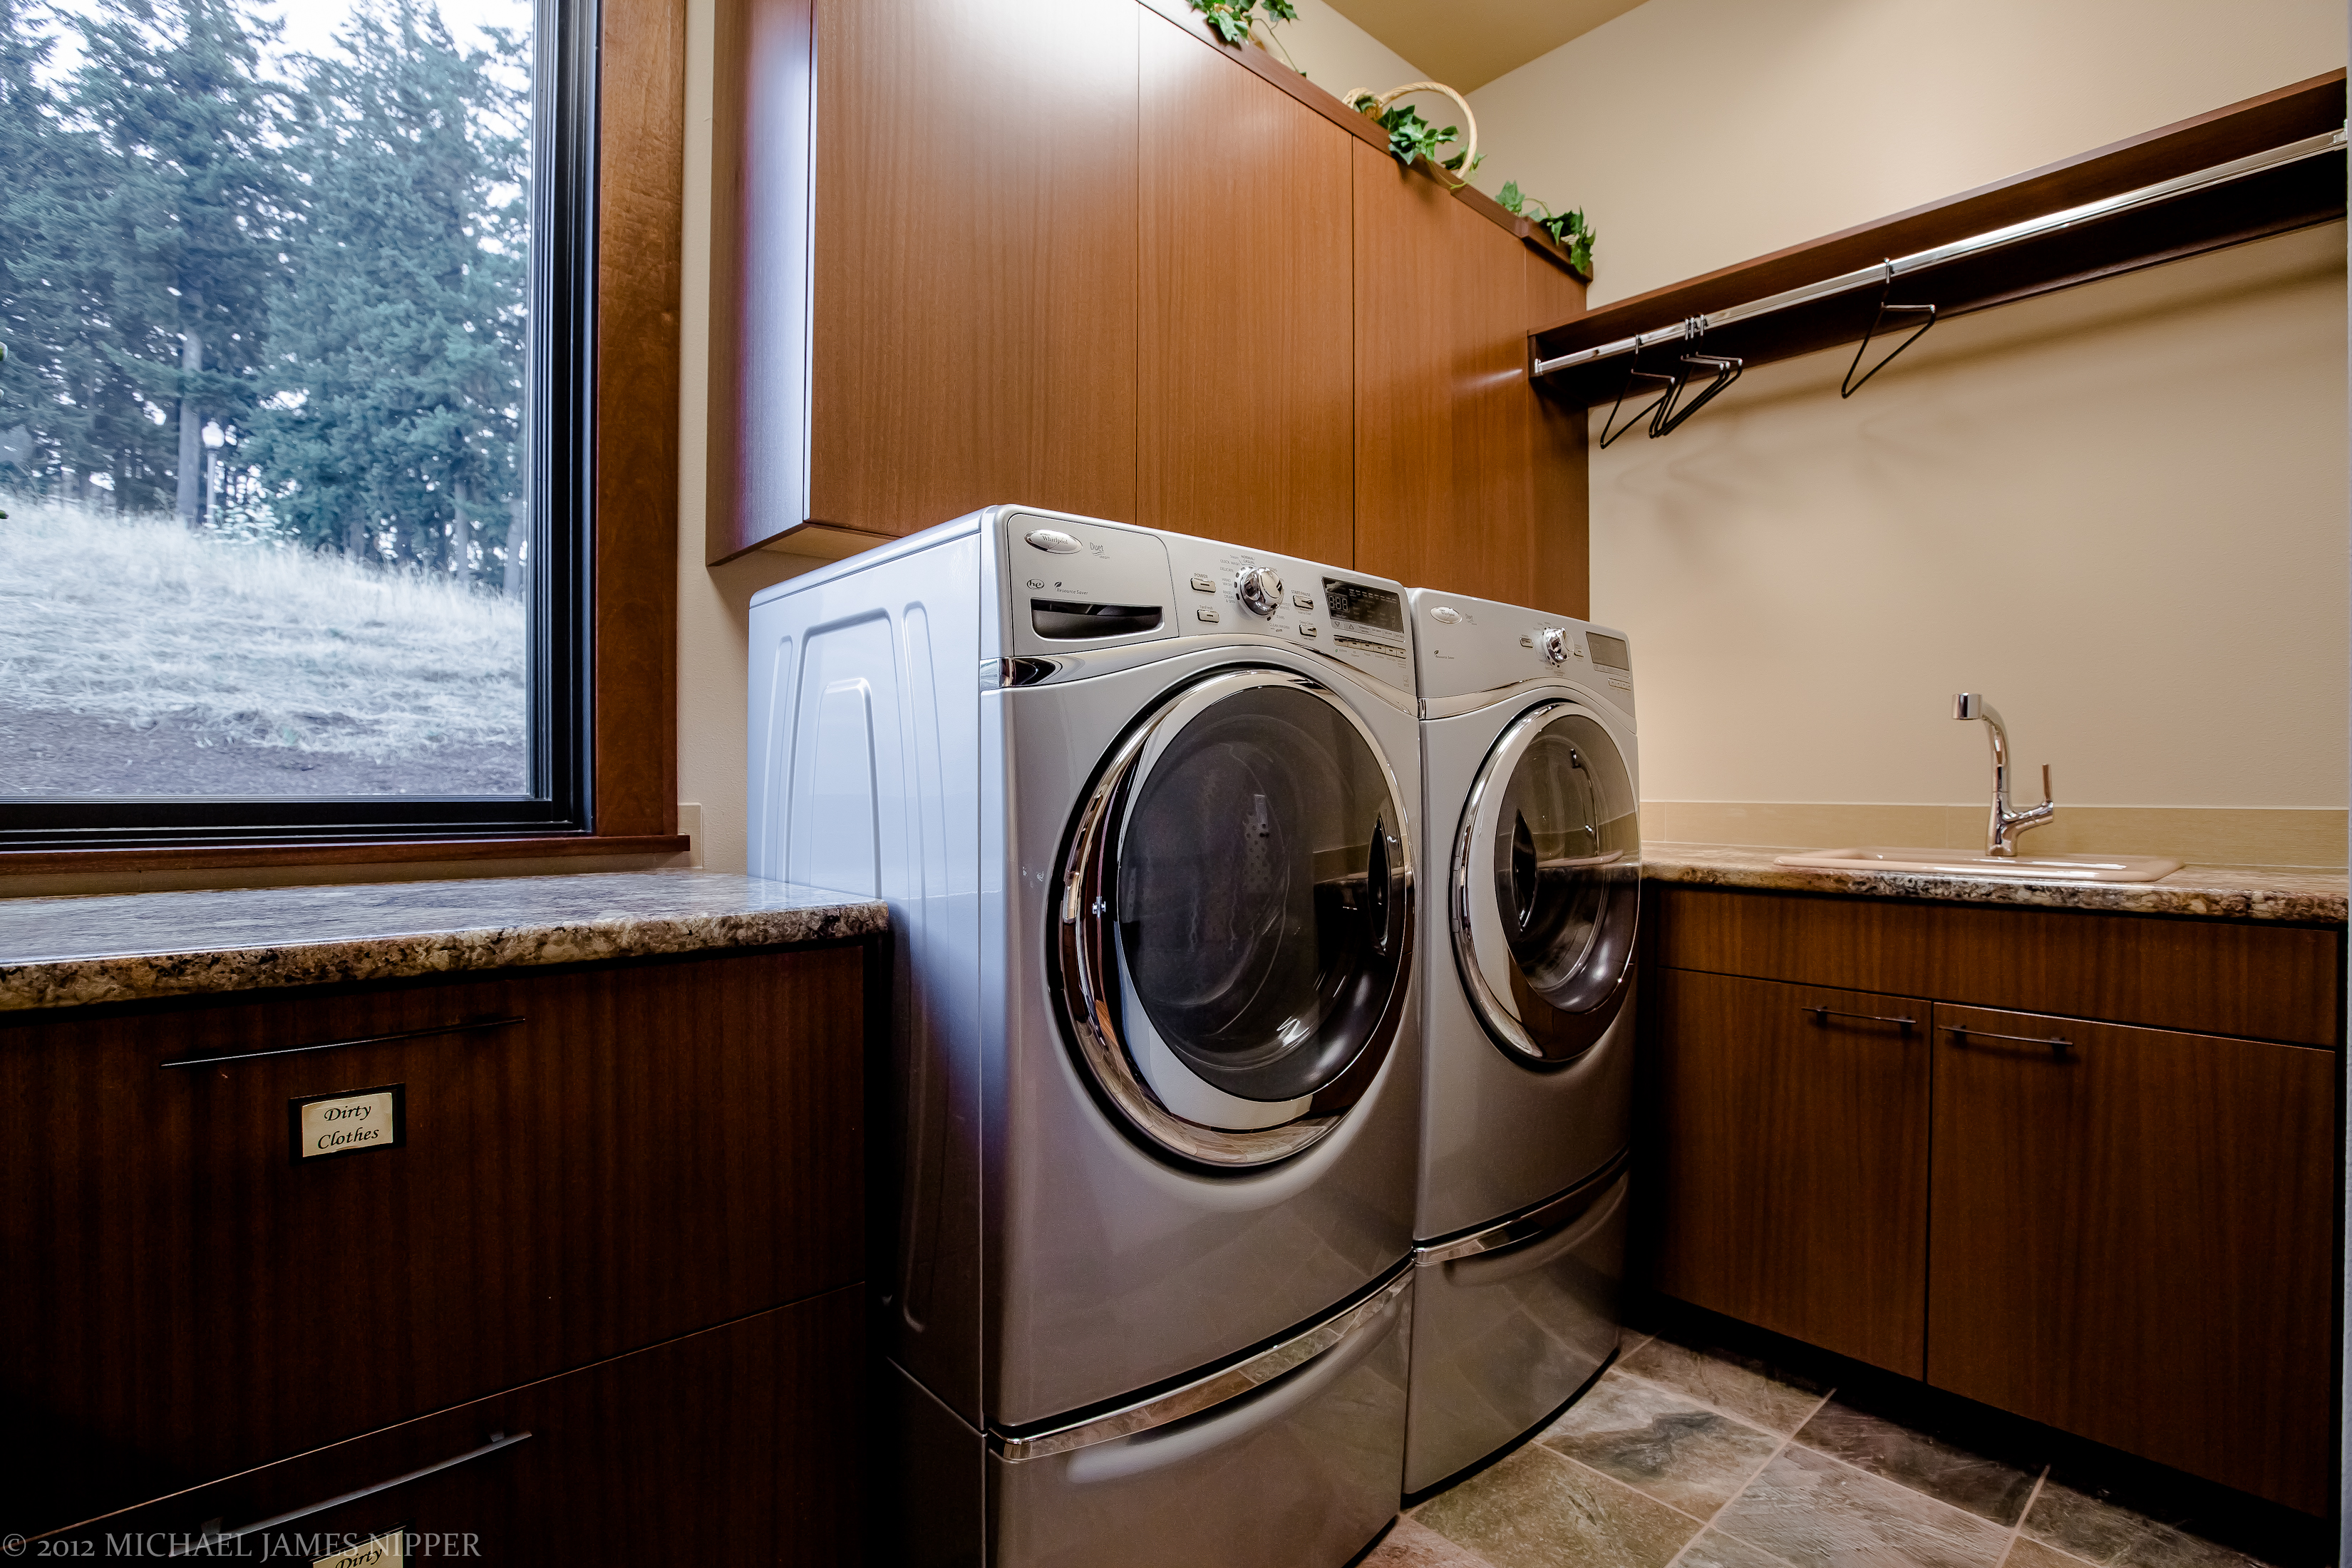 Laundry room with washer and dryer of 2013 Street of Dreams Custom Home 20-20 by Rick Bernard of Bernard Custom Homes.